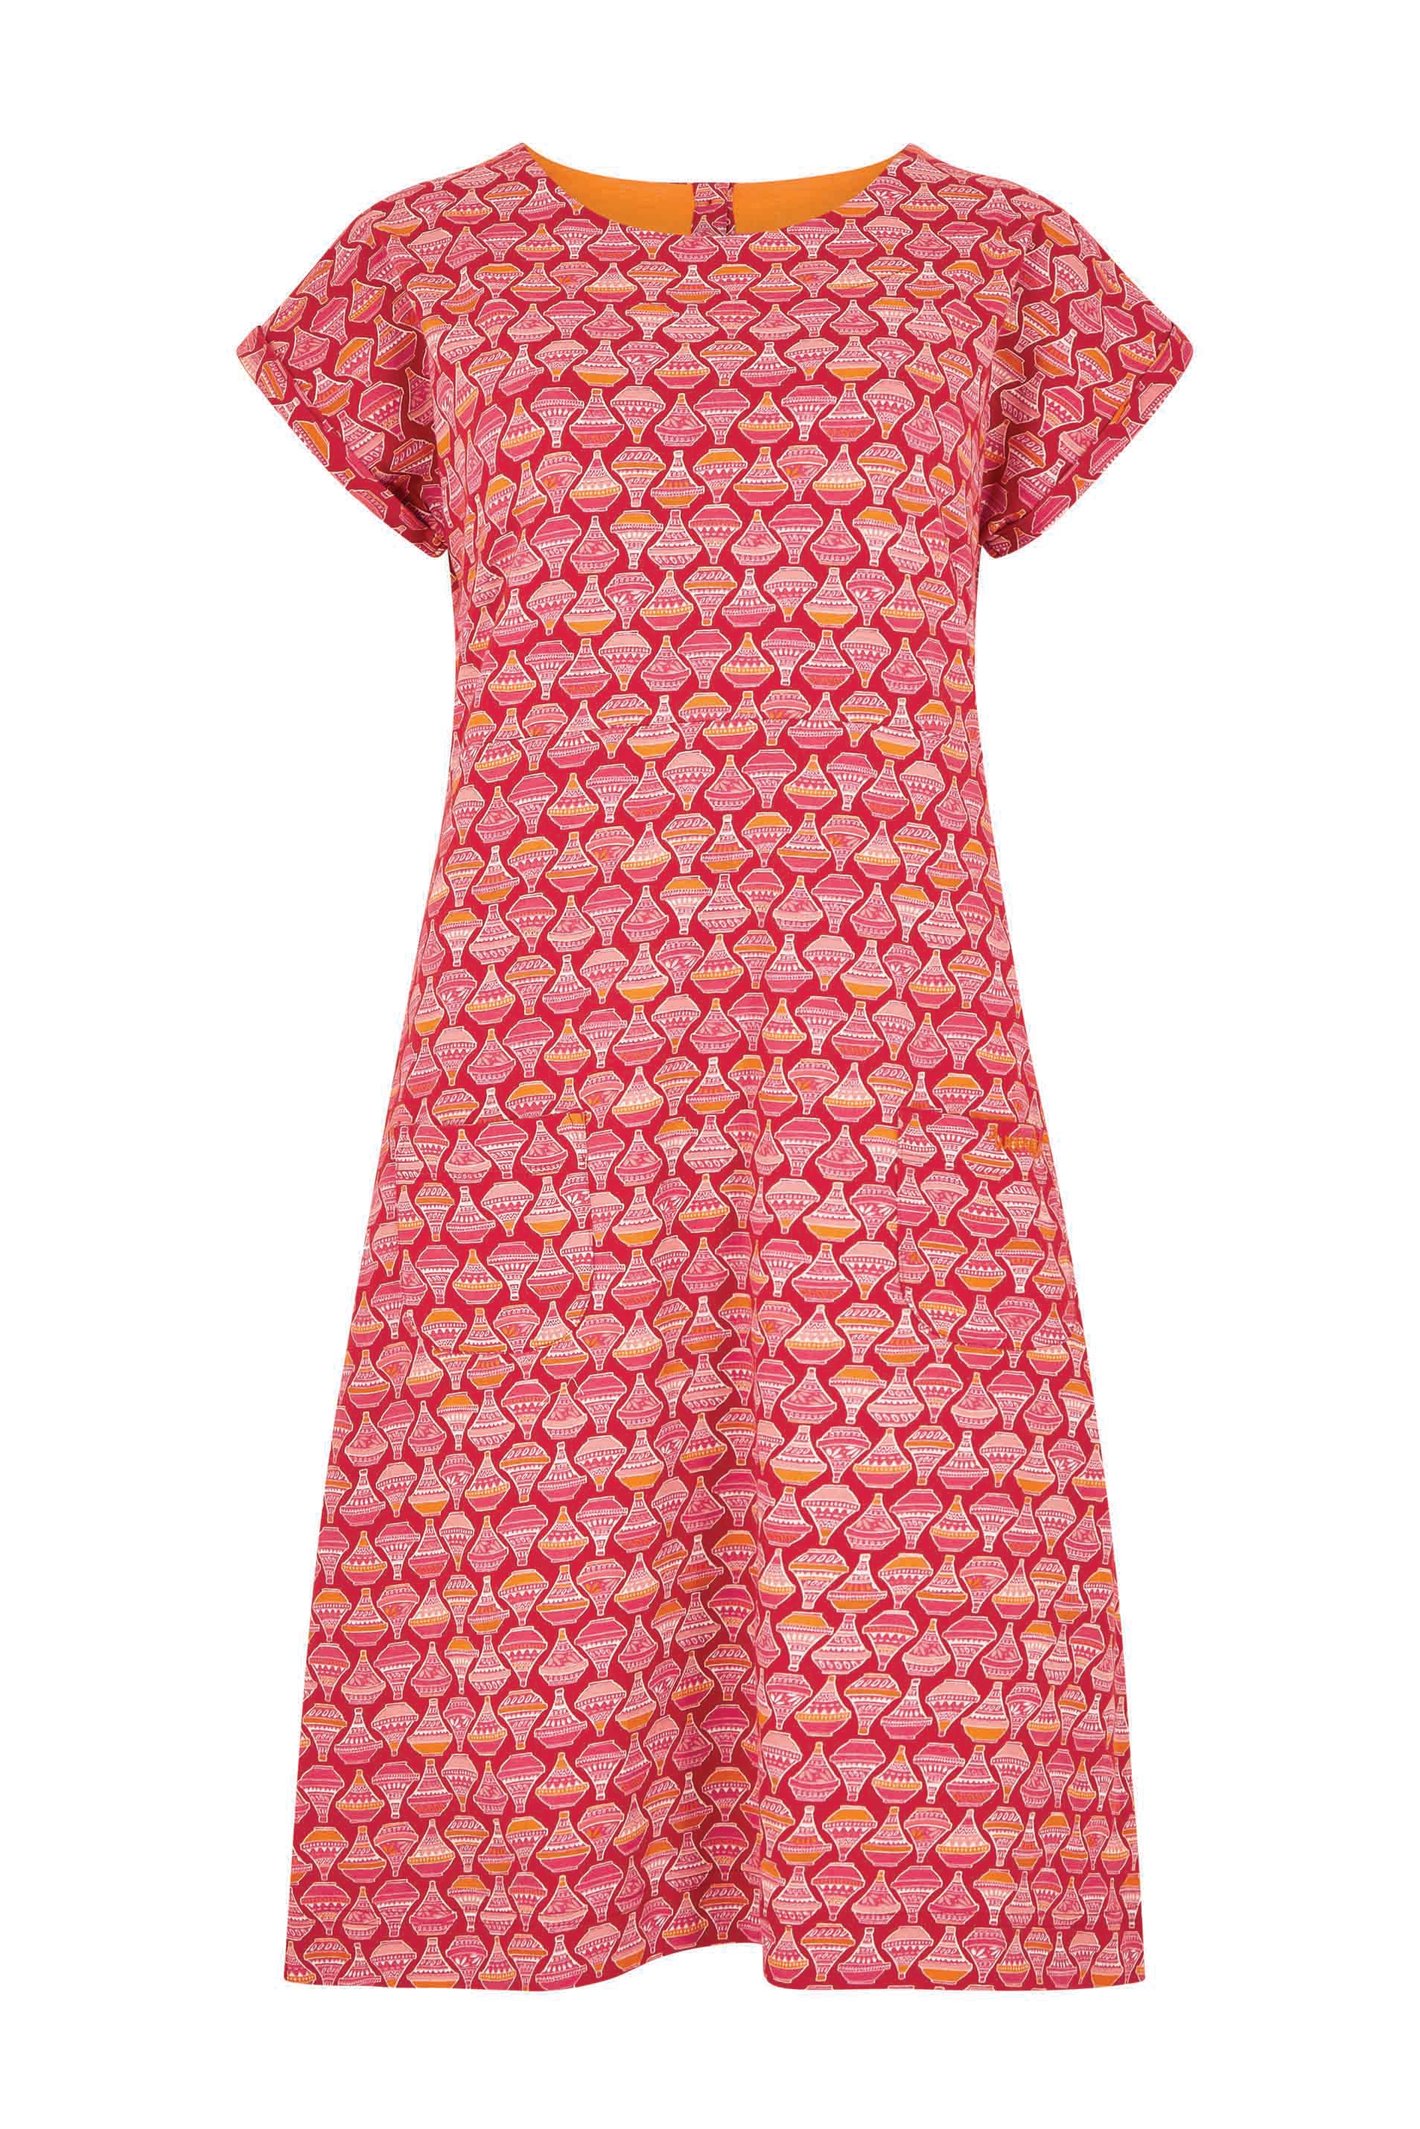 Weird Fish Tallahassee Organic Cotton Jersey Dress Barberry Red Marl Size 20